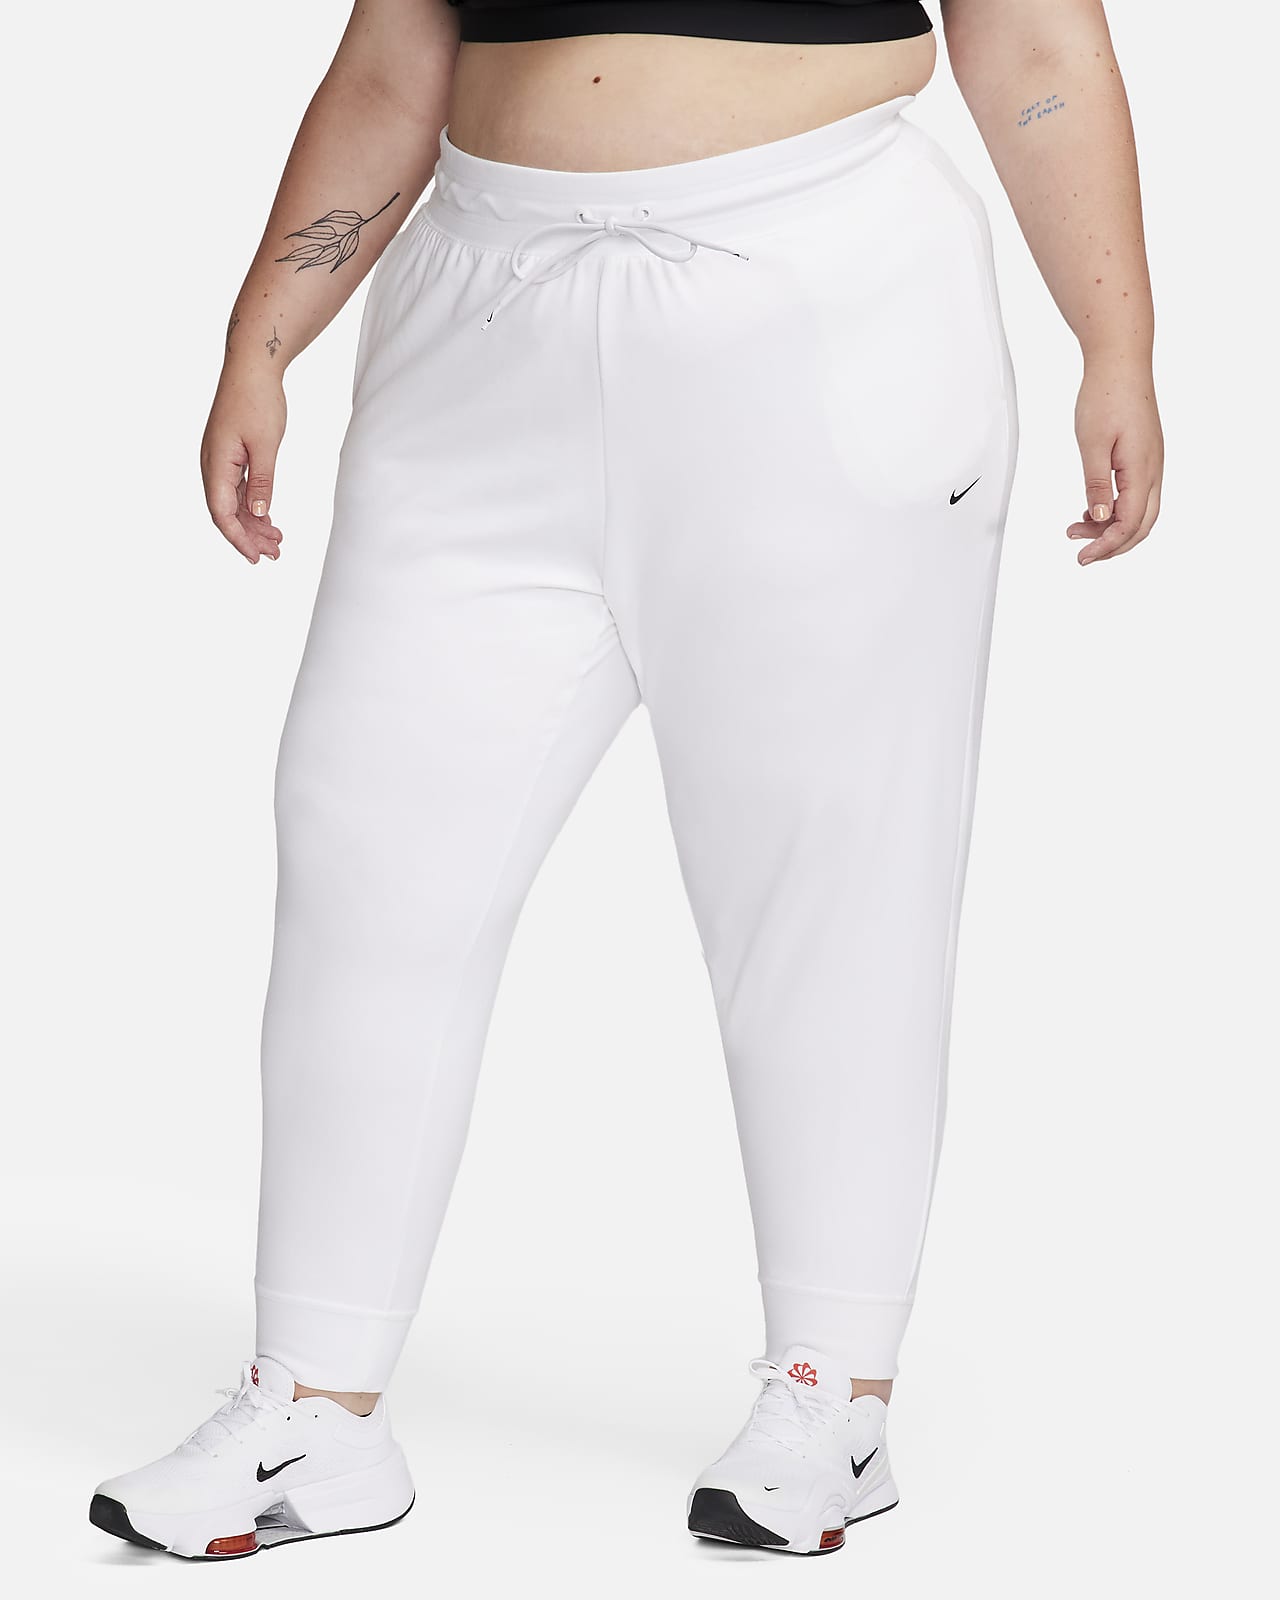 Nike Dri-FIT One Women's High-Waisted 7/8 French Terry Joggers (Plus Size).